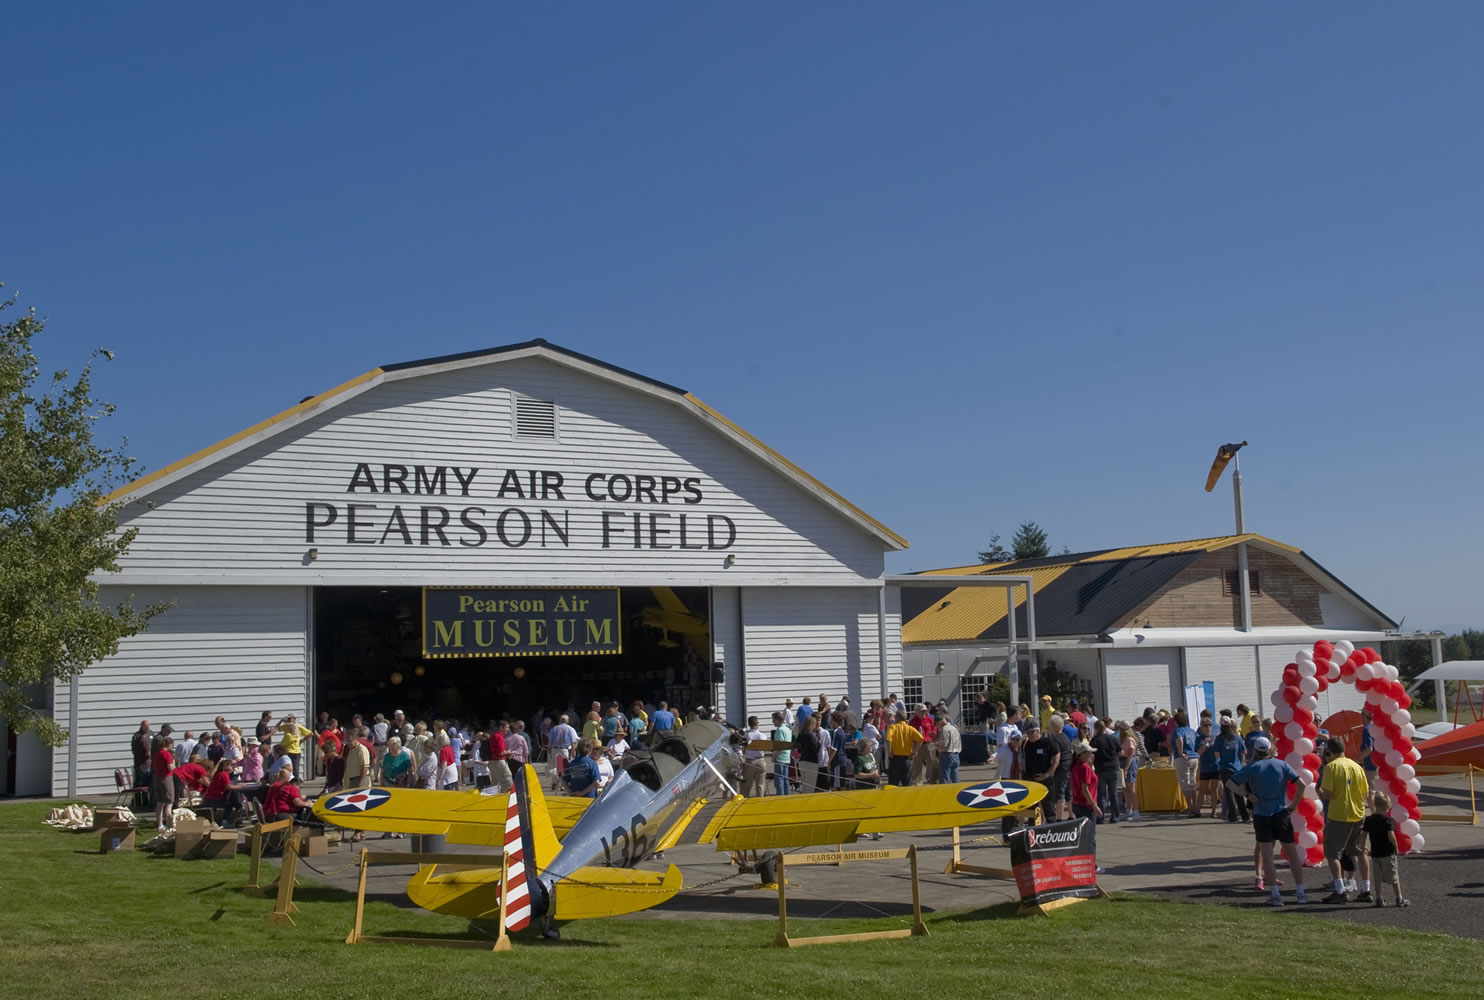 The National Park Service has terminated an agreement with the city of Vancouver, putting Pearson Air Museum under management of the park service's Fort Vancouver National Historic Site.